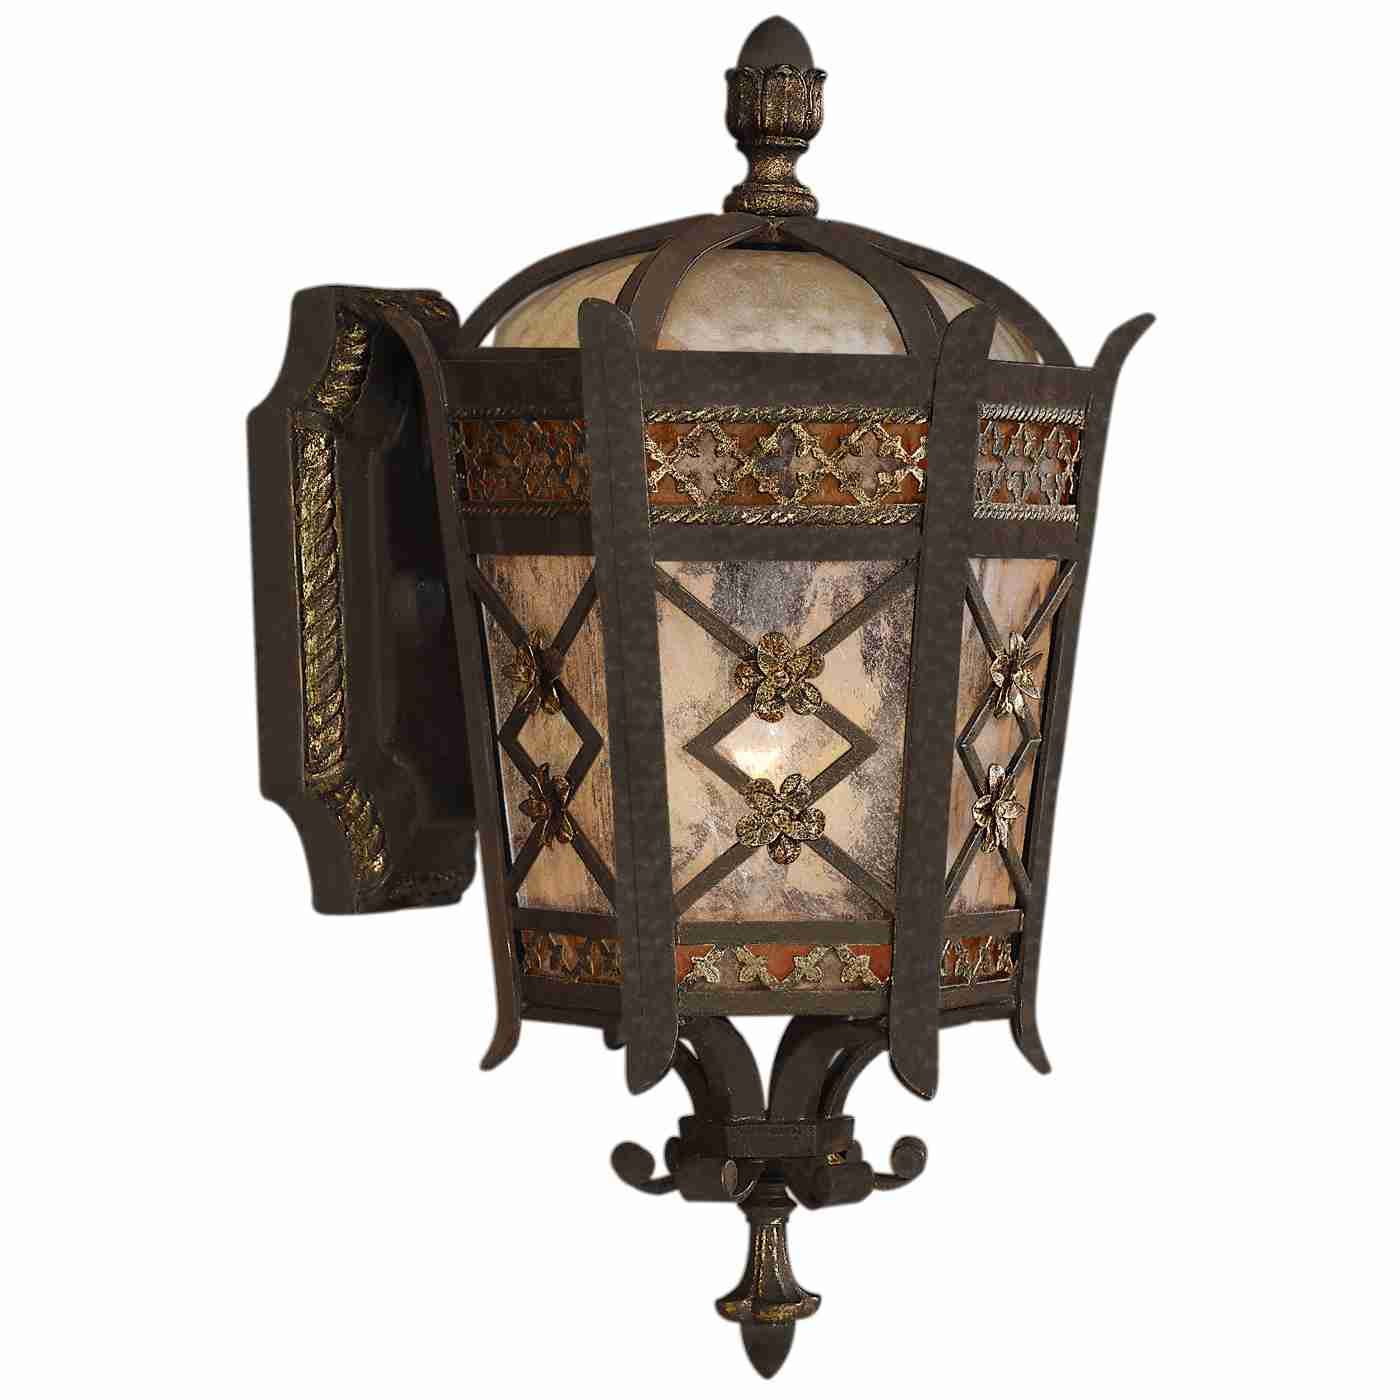 Chateau Outdoor Wall Light Bronze